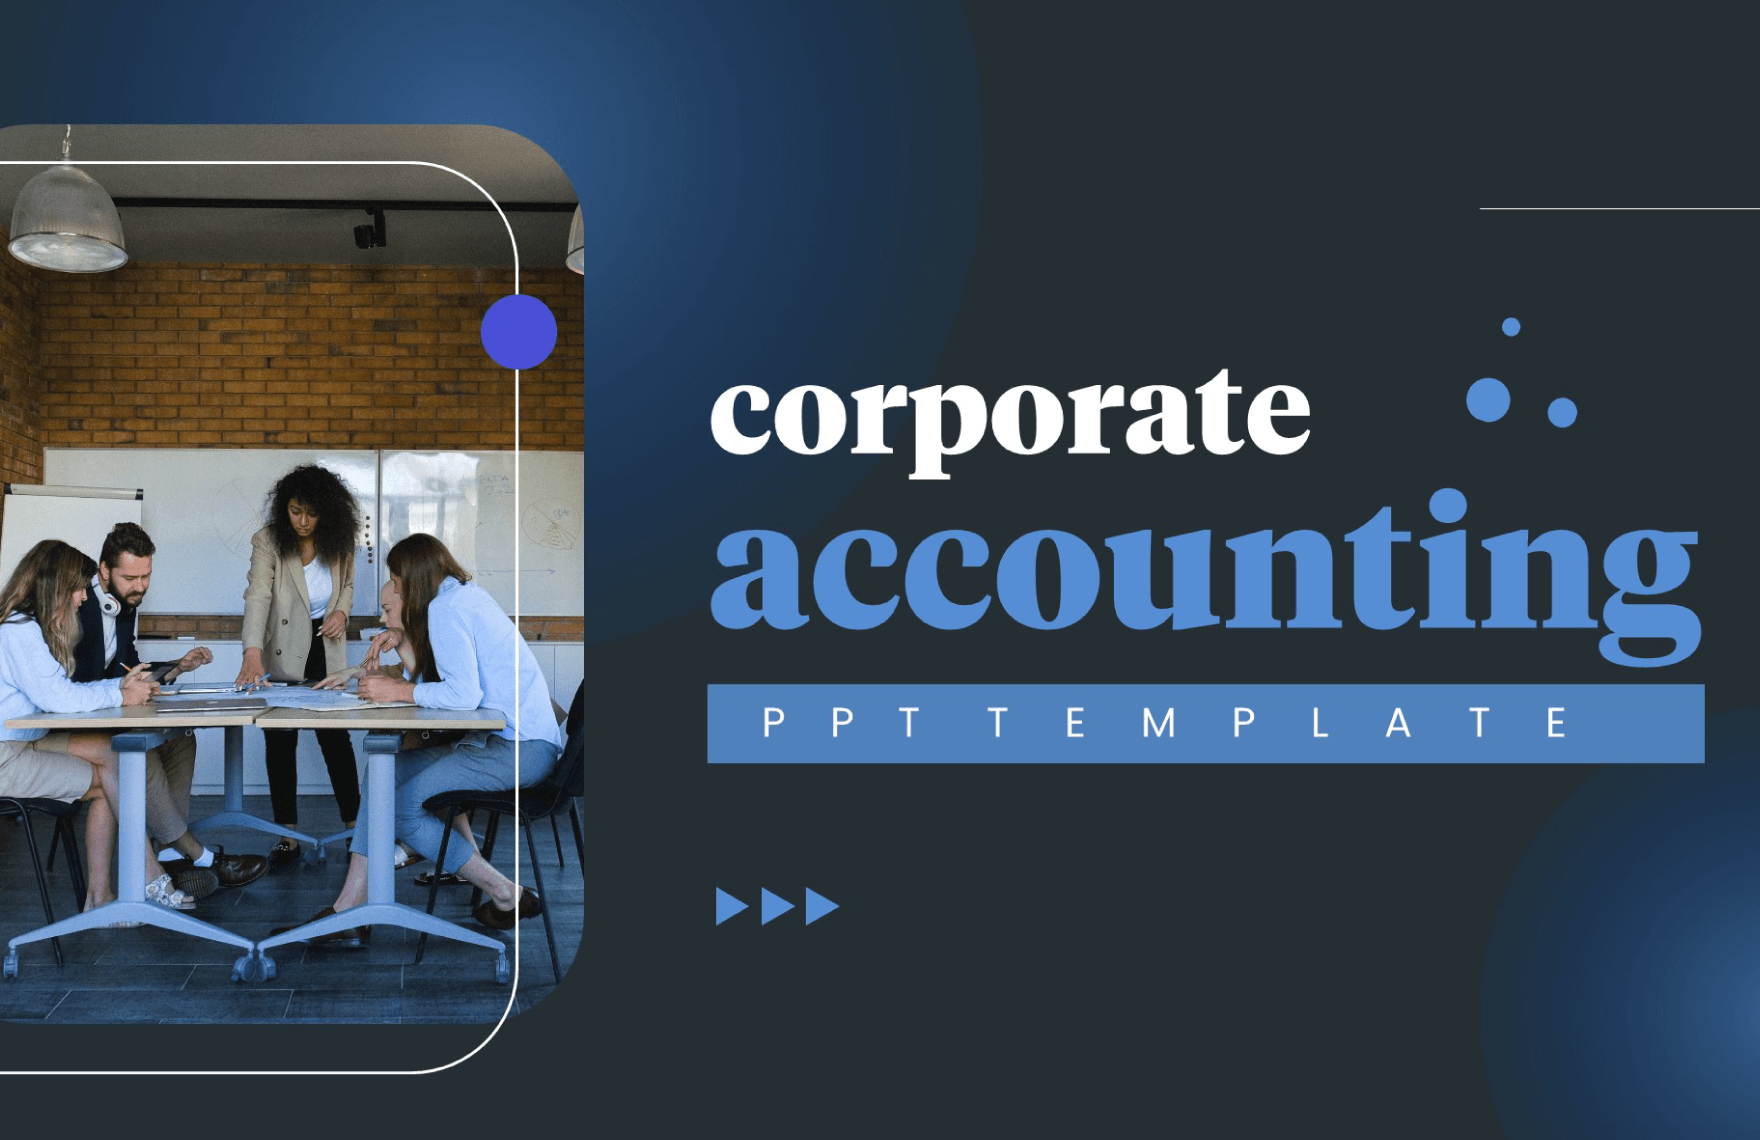 Corporate Accounting PPT Template